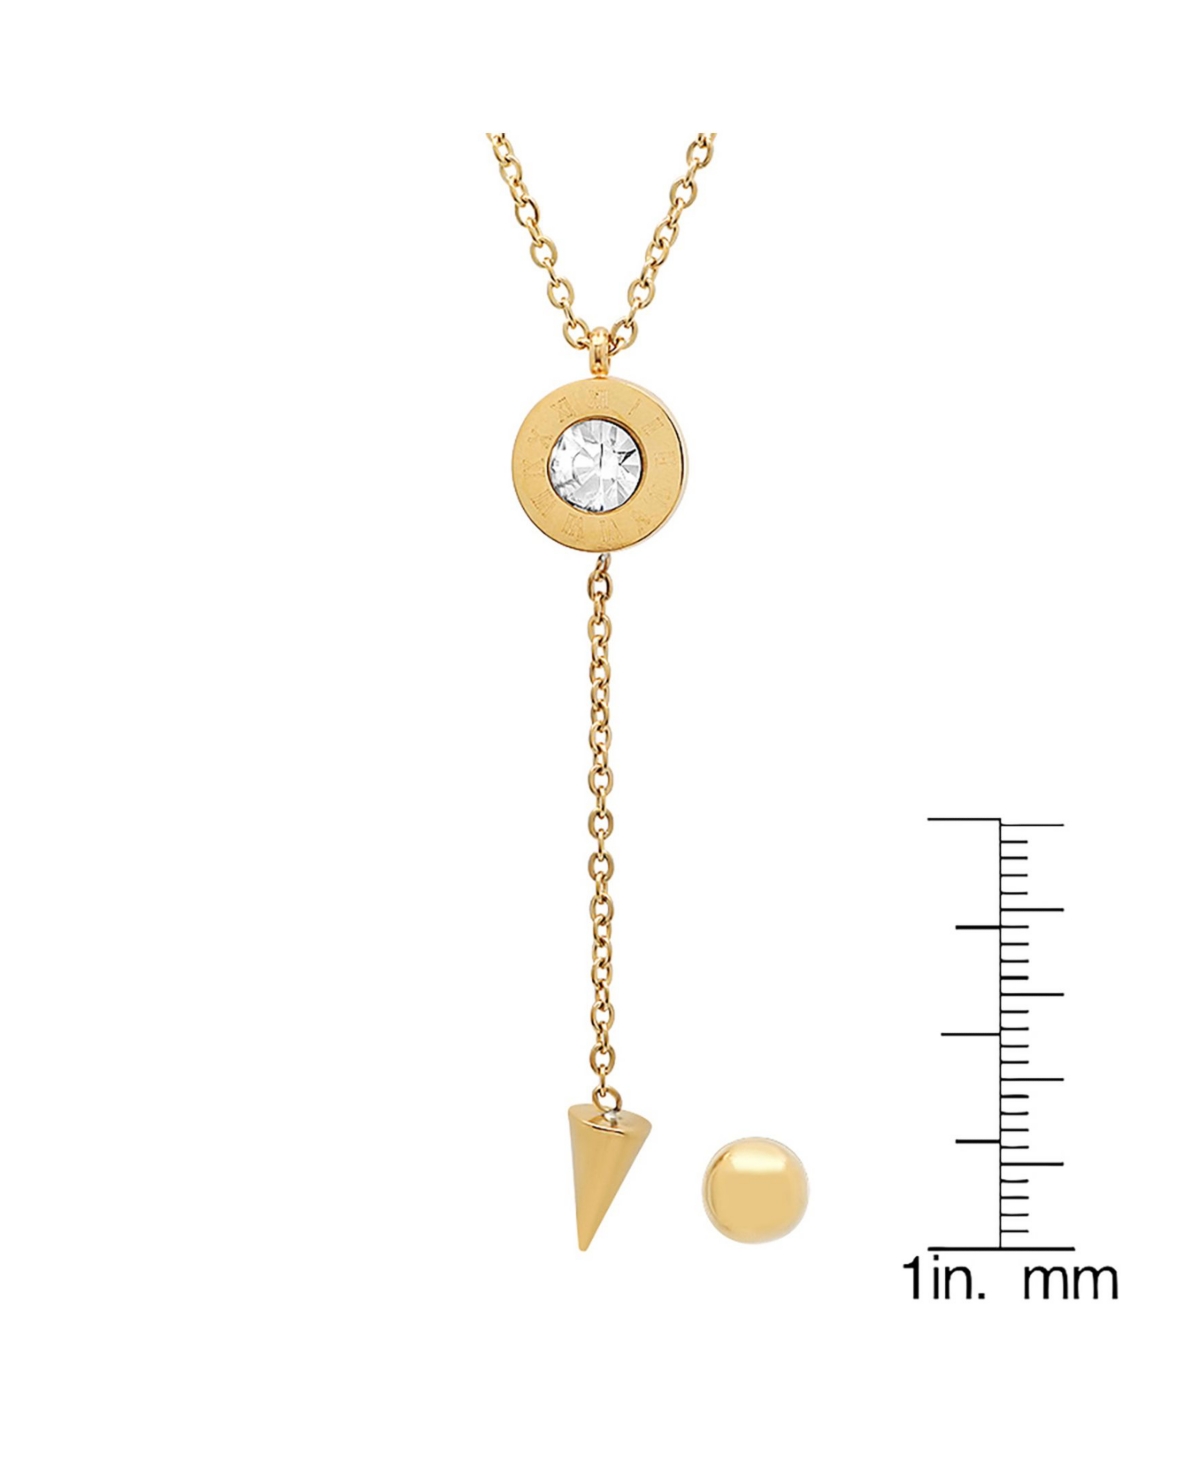 Ladies 18K Gold Plated Stainless Steel Roman Numeral Center Drop Necklace Set, 2 Piece - Gold-Plated